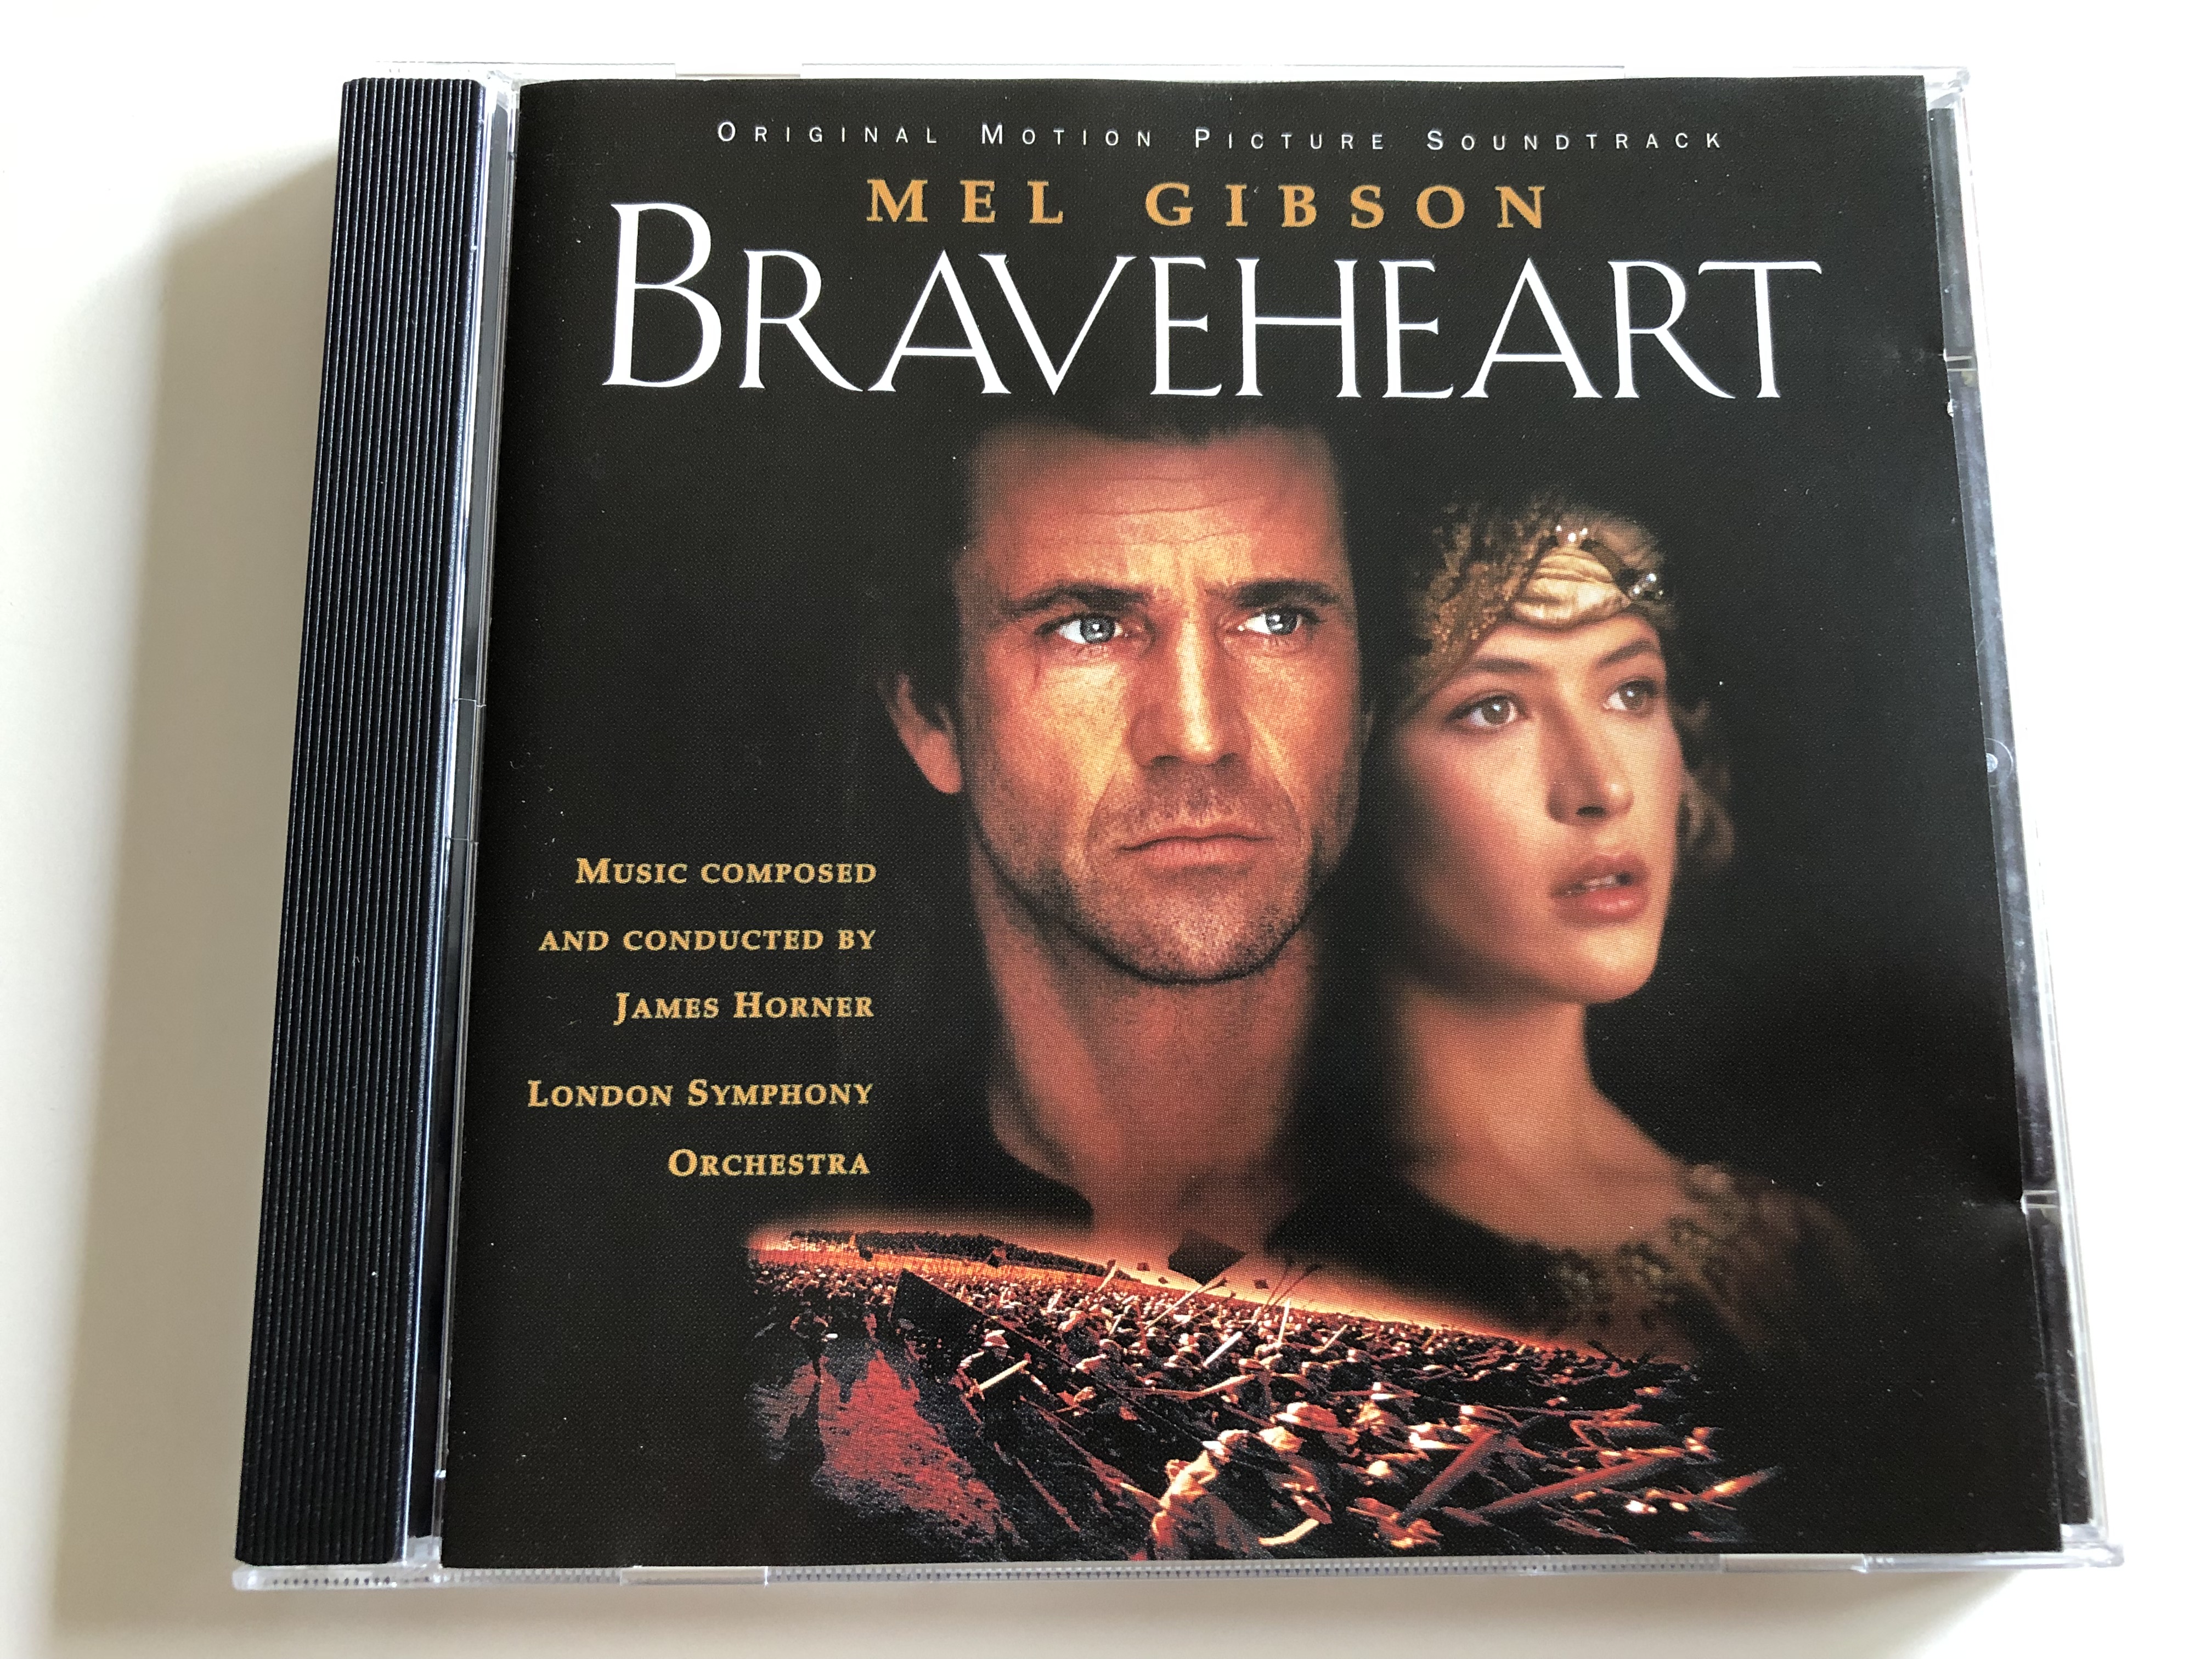 braveheart-original-motion-picture-soundtrack-music-composed-and-conducted-by-james-horner-london-symphony-orchestra-audio-cd-1995-1-.jpg